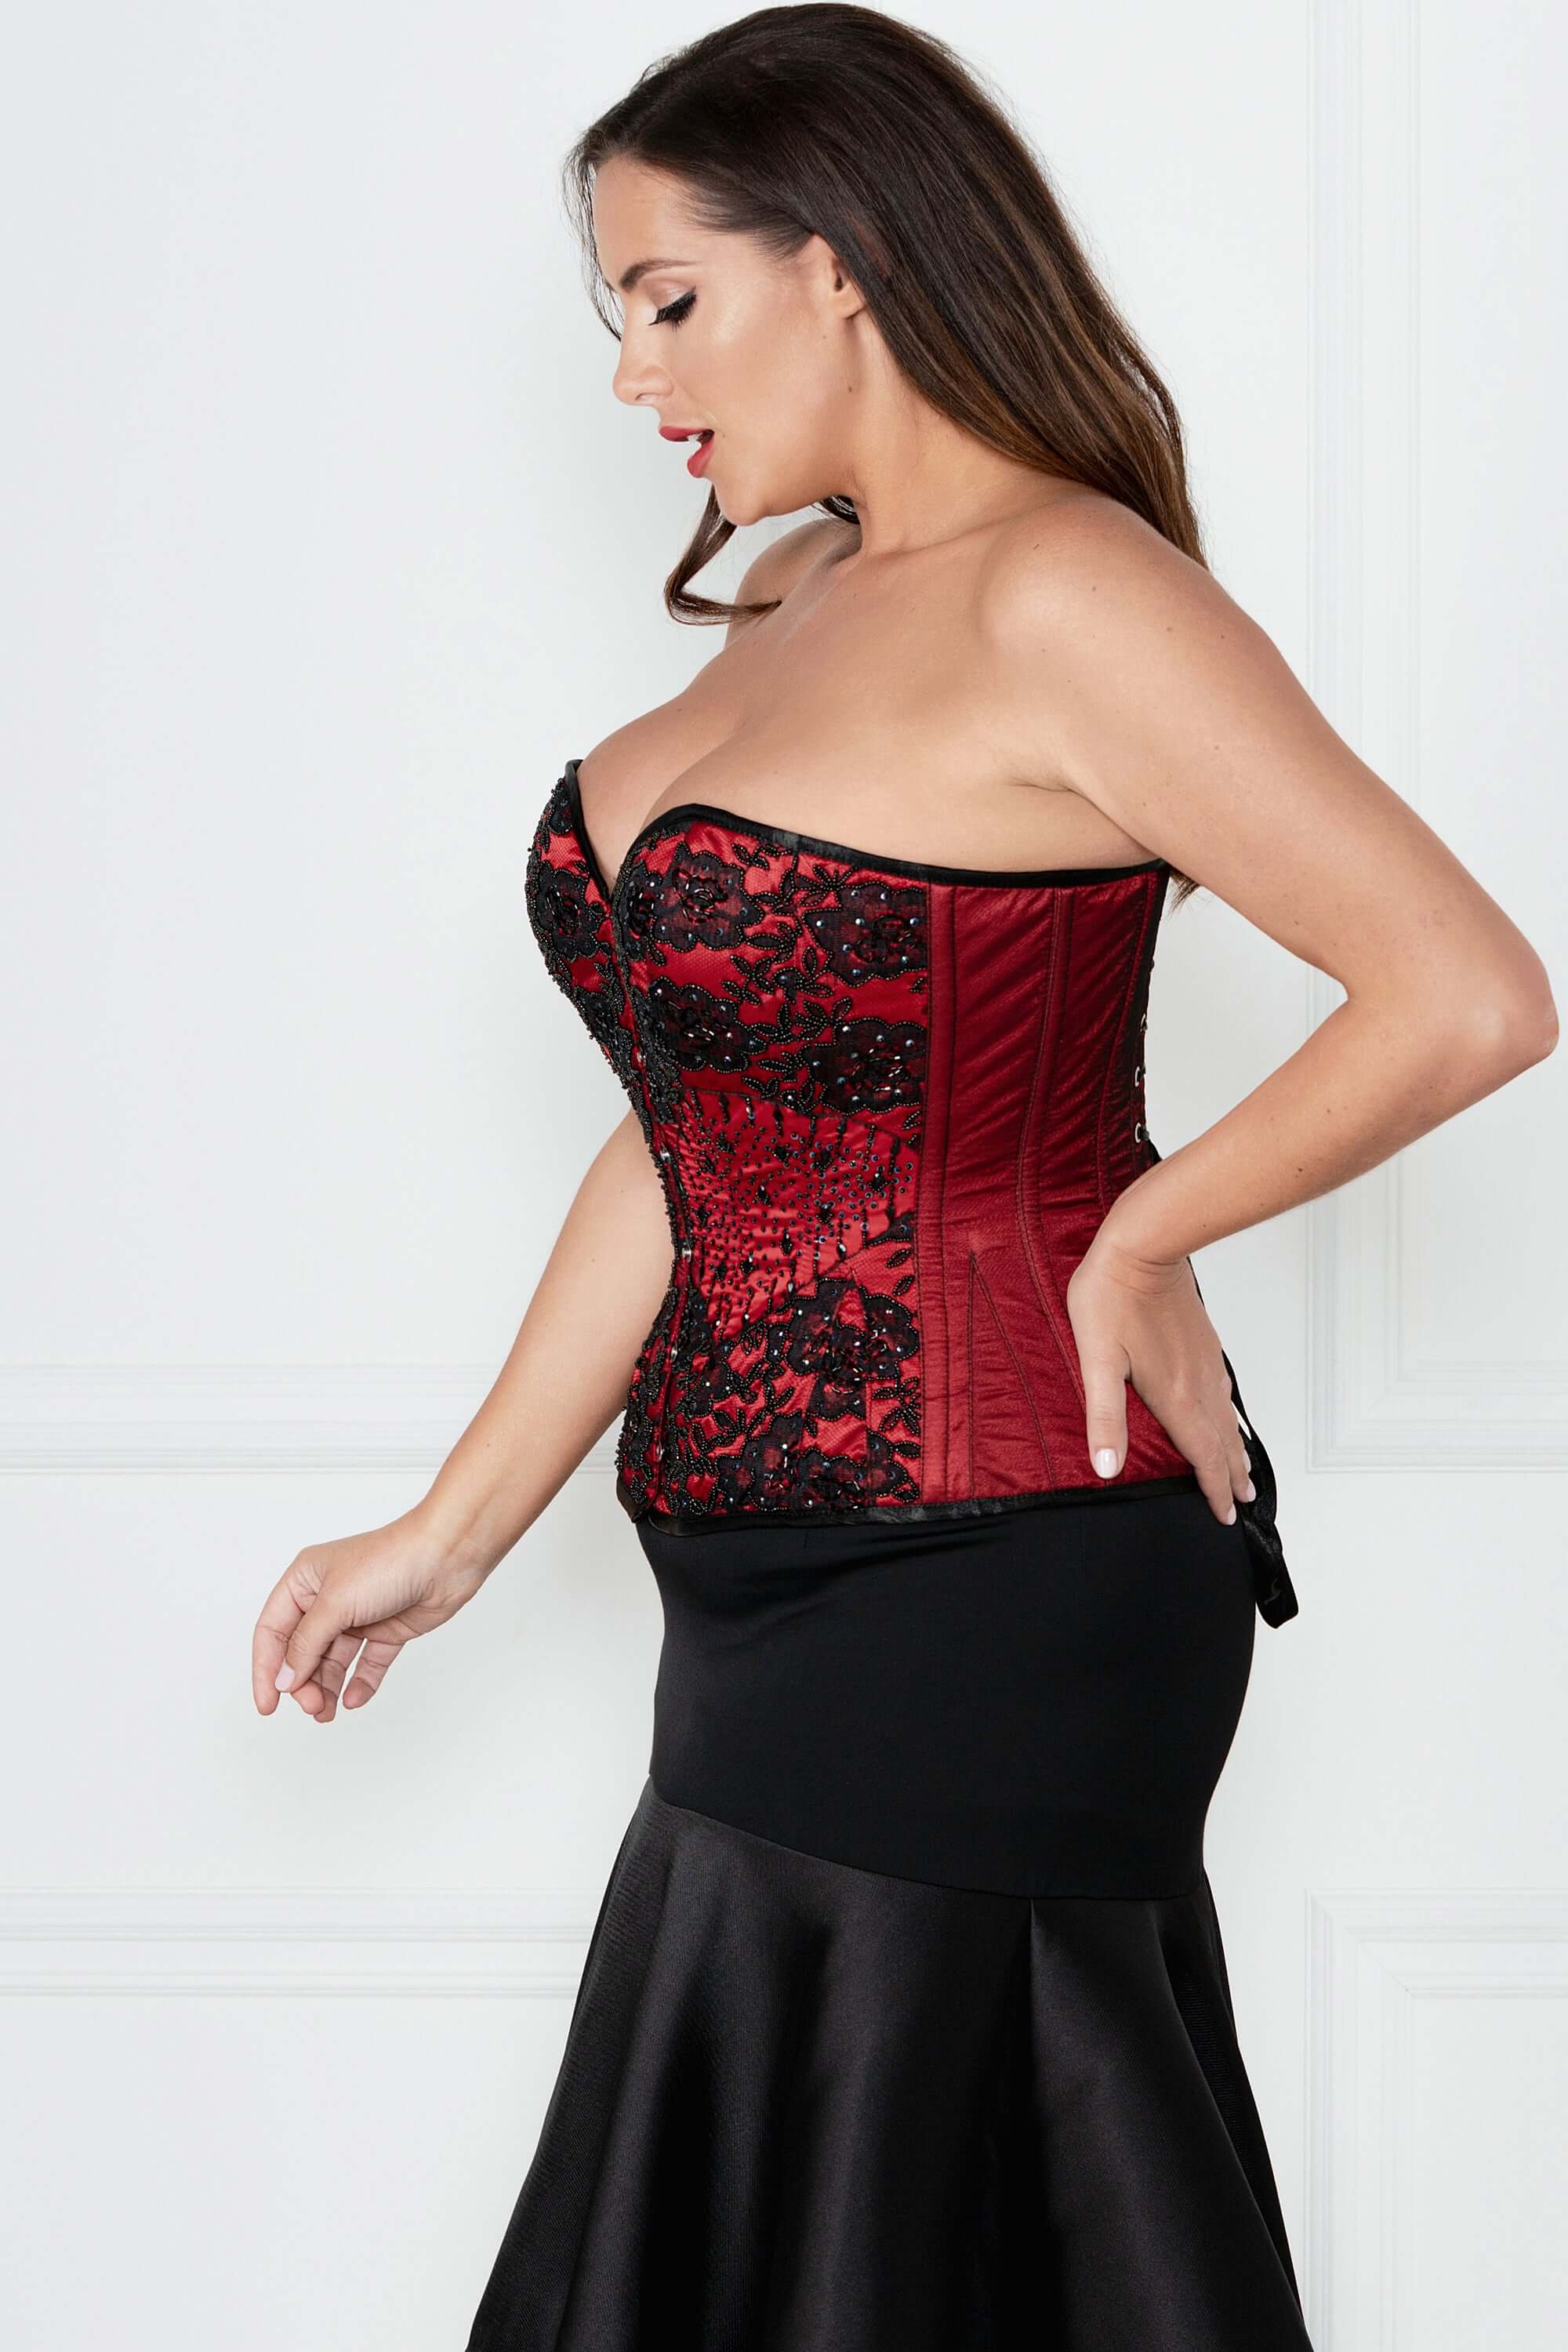 Beautiful Red Couture Corset